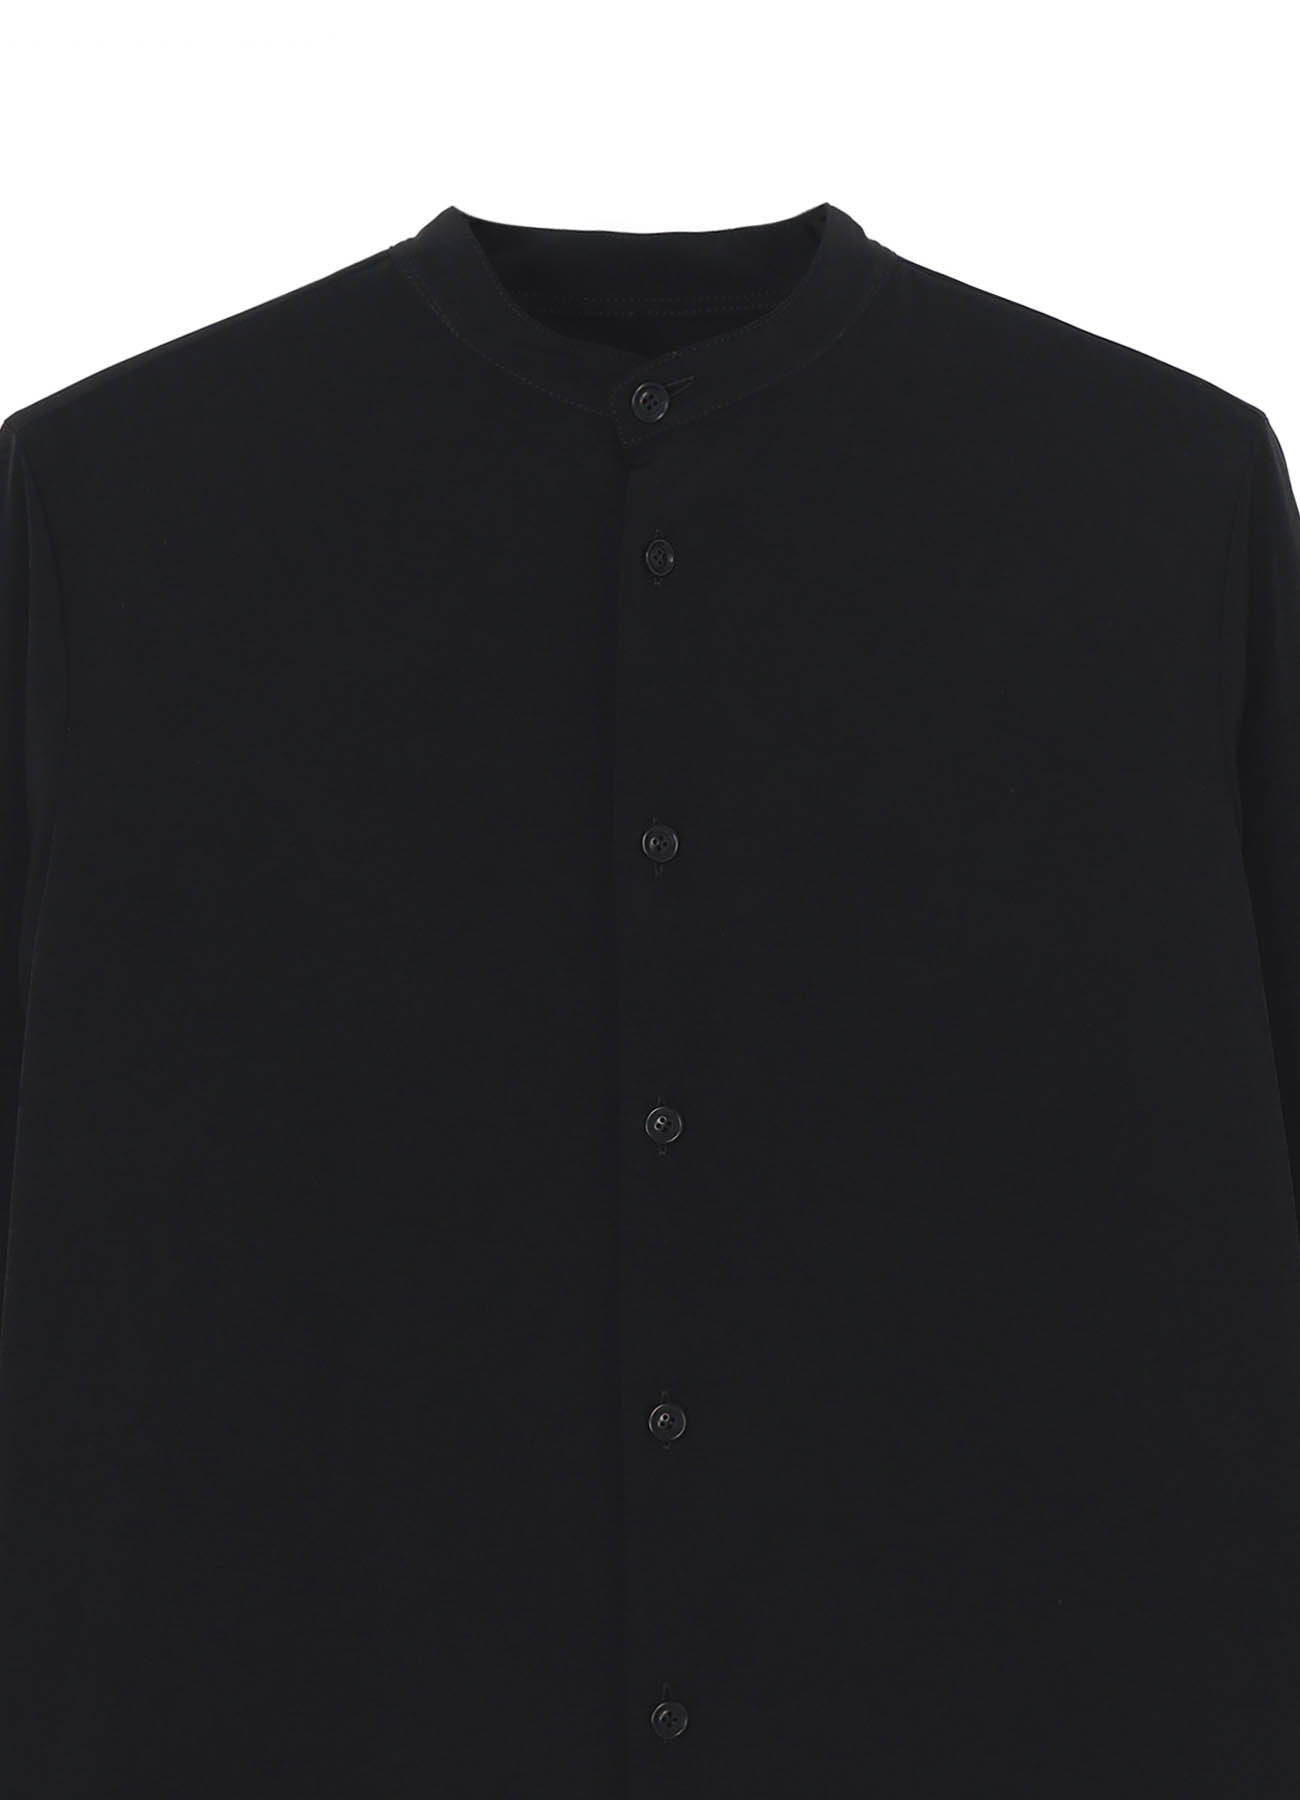 TRIACETATE POLYESTER CREPE de CHINE FLAP POCKET STAND COLLAR SHIRT